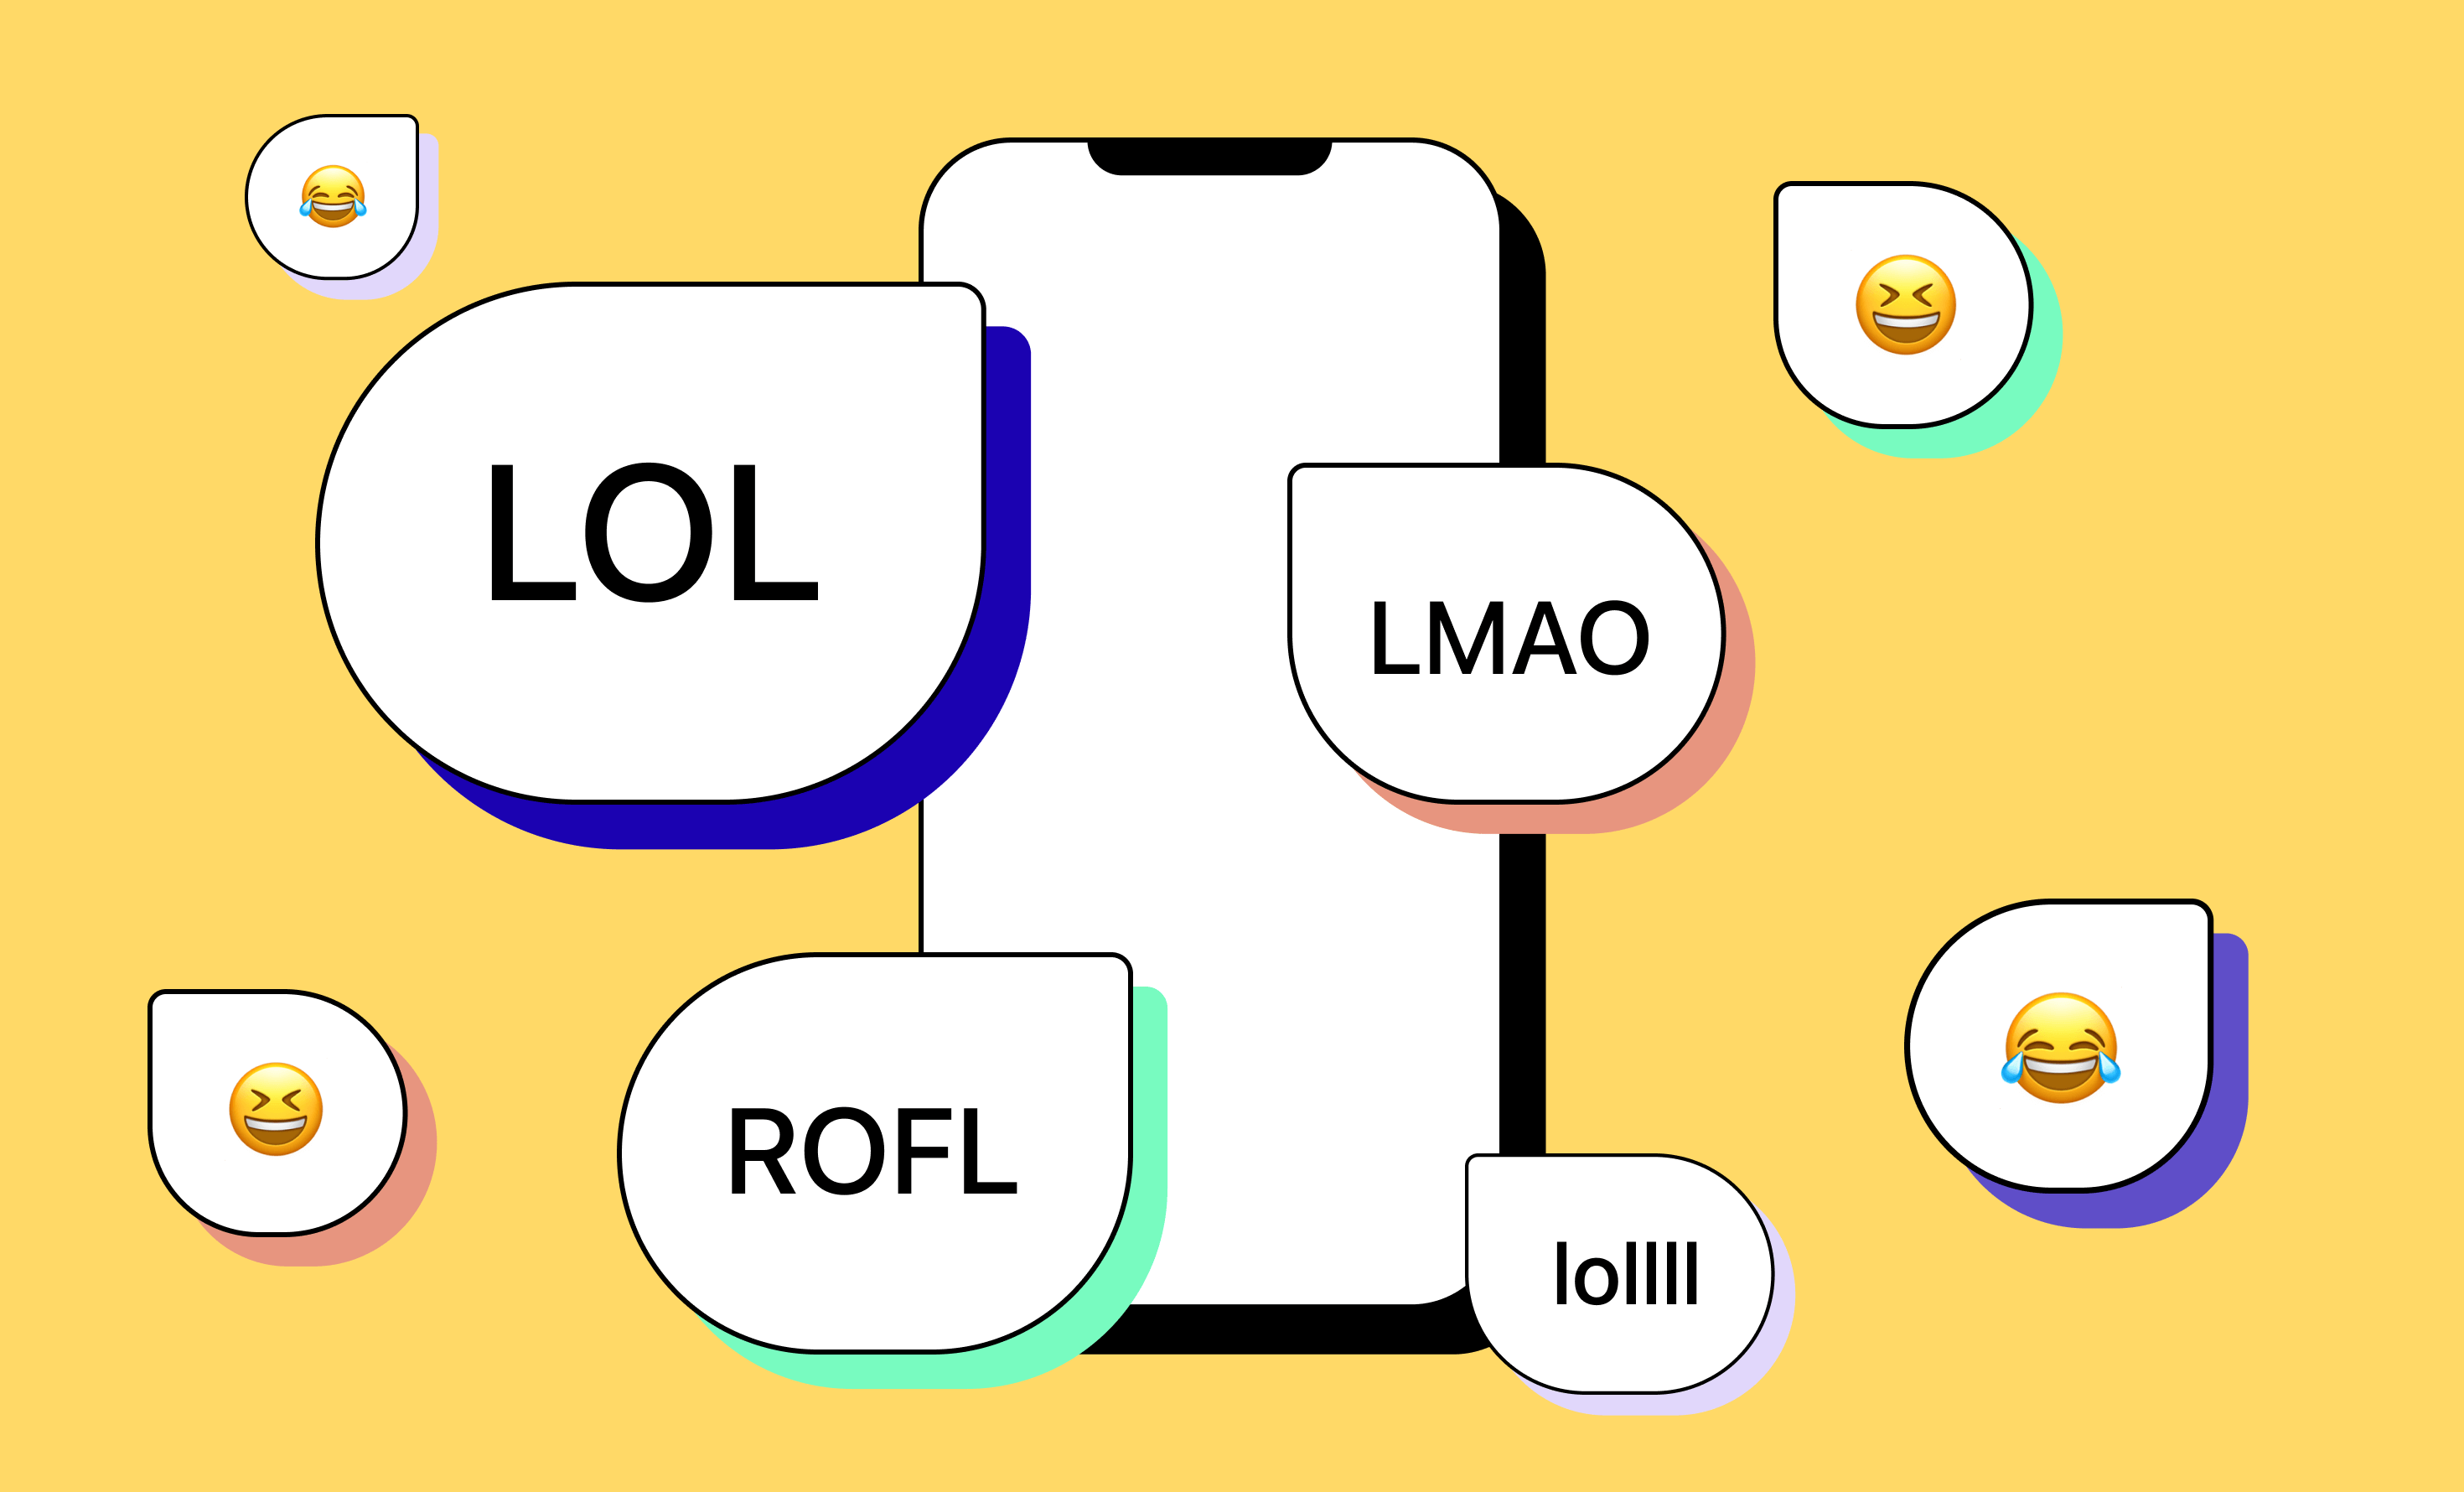 Cell phone illustration with texts saying LOL, ROFL, LMAO, and lolll